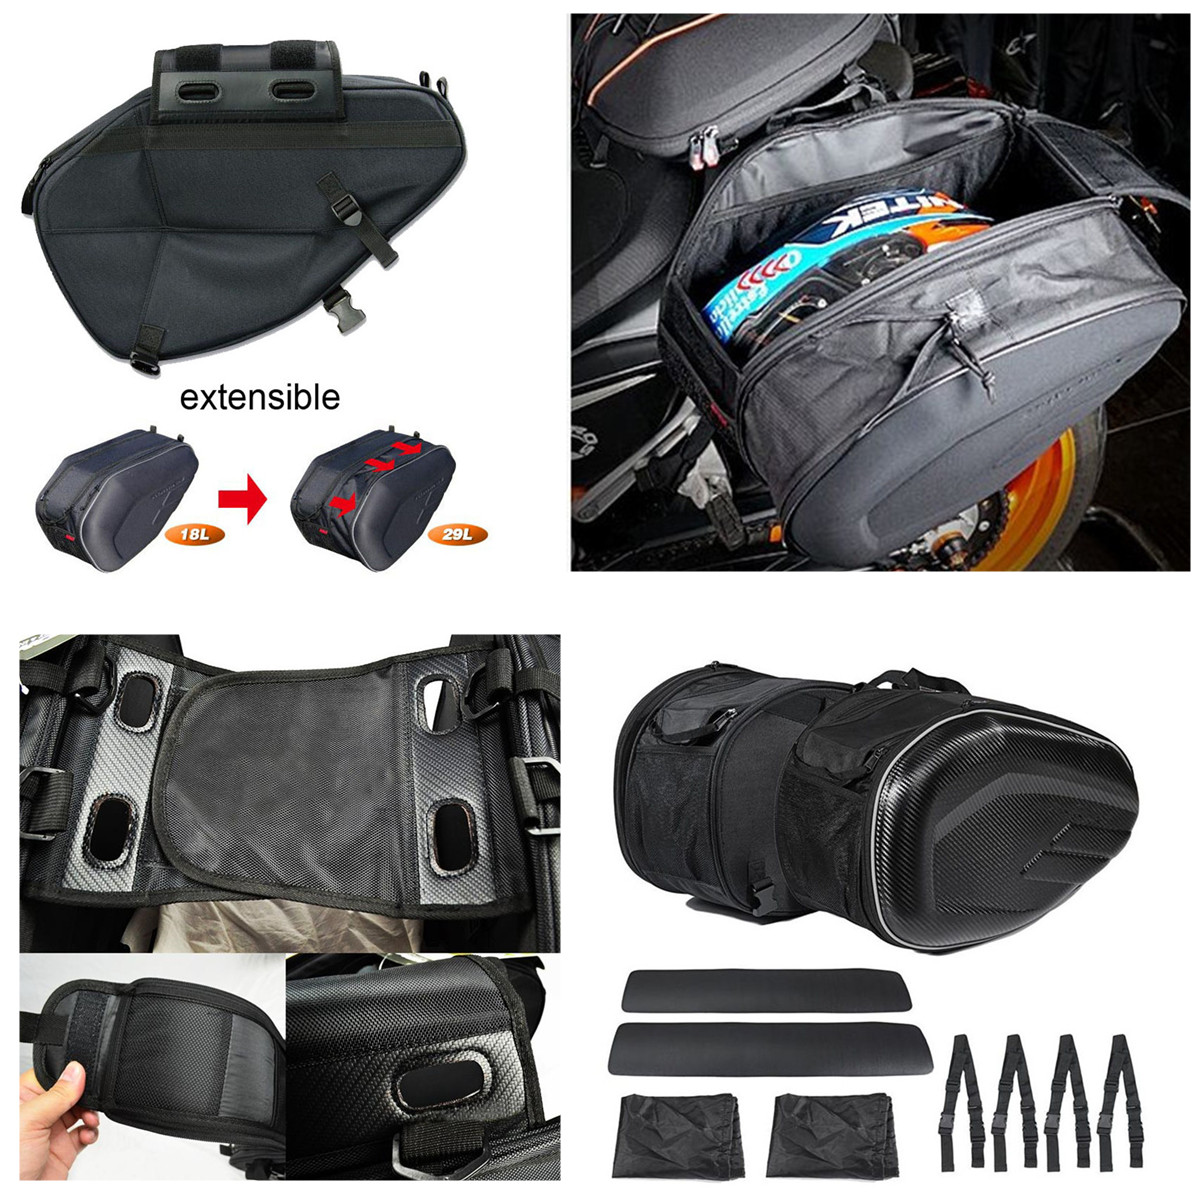 Universal fit Motorcycle komine Bags Luggage Saddle Bags with Rain Cover 36-58L